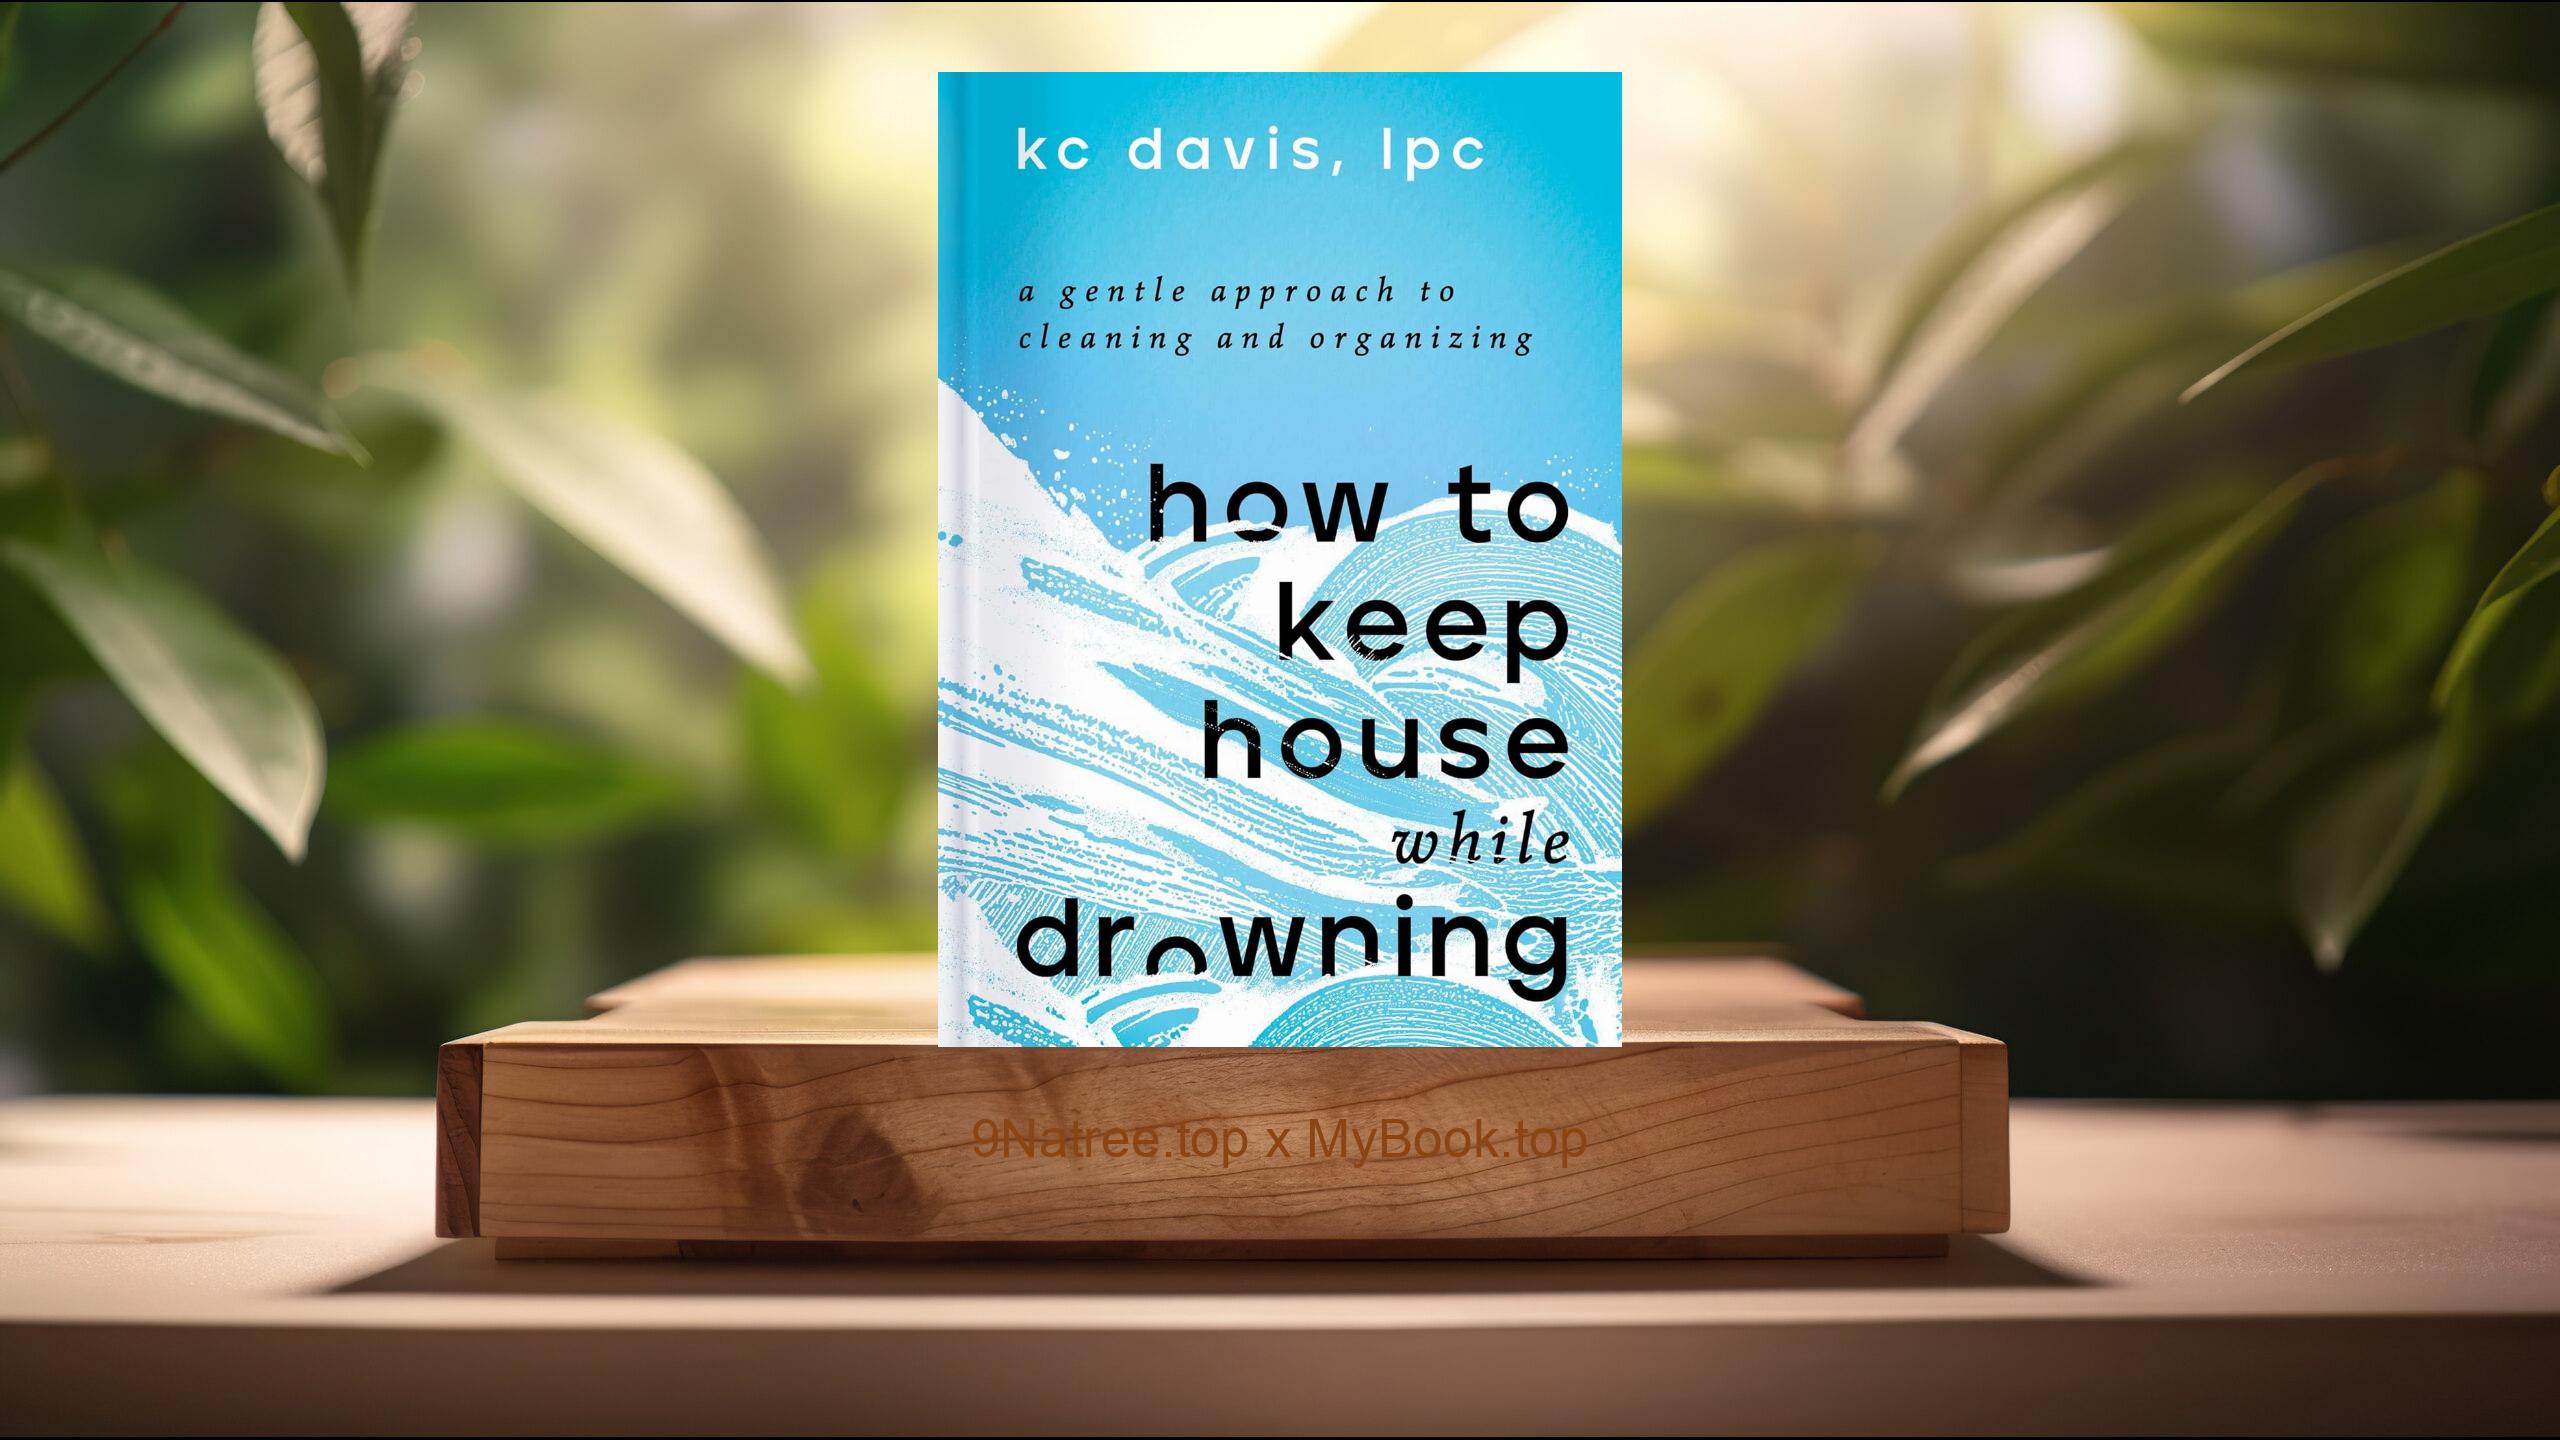 [Review] How to Keep House While Drowning (KC Davis) Summarized